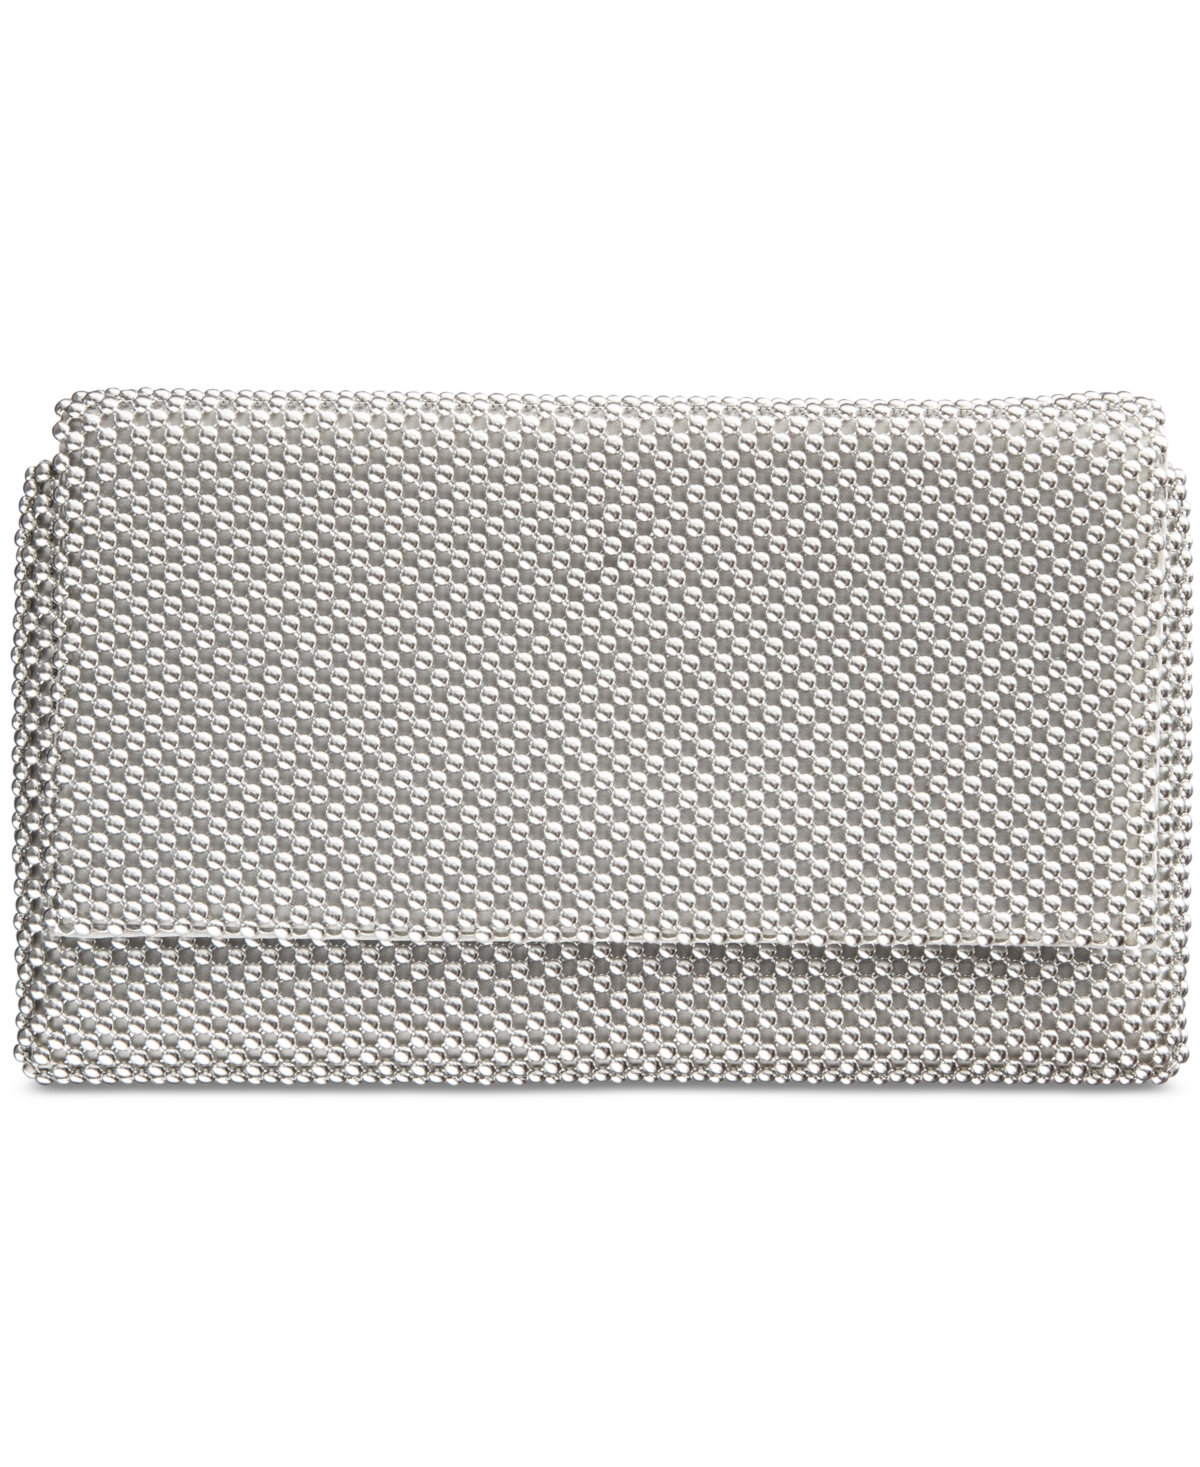 Prudence Shiny Mesh Clutch, Created for Macy's - Silver/Silver